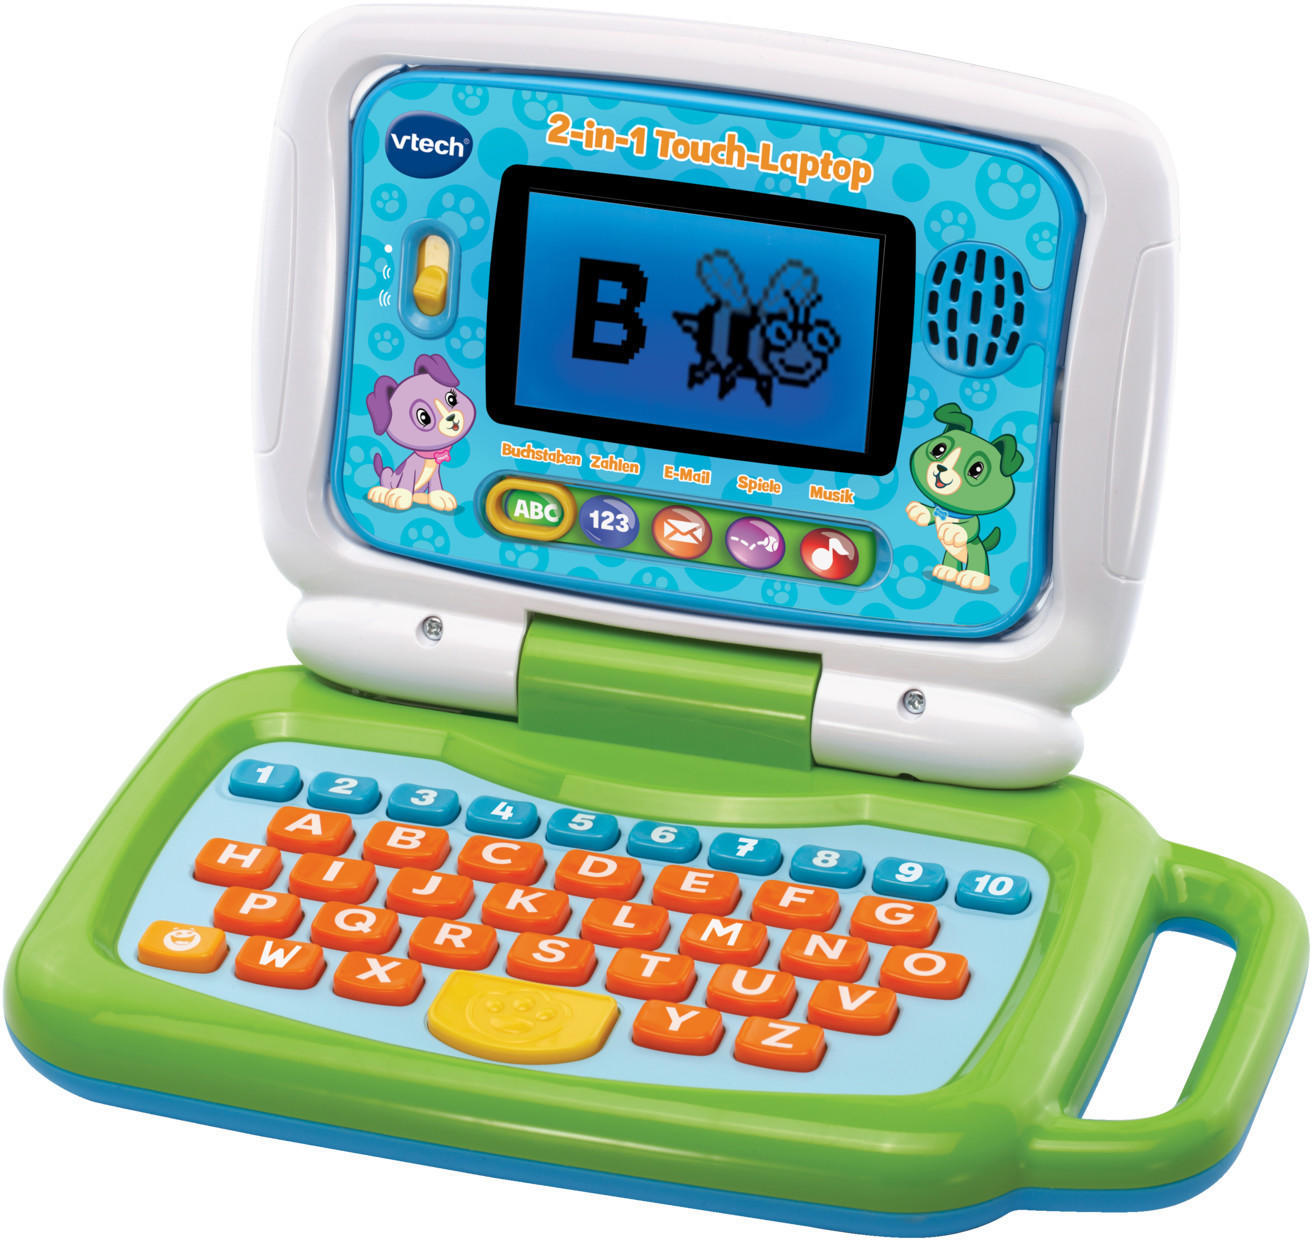 Vtech ReadySetSchool - 2-in-1 Touch-Laptop grün Test TOP Angebote ab 29,79  € (August 2023)